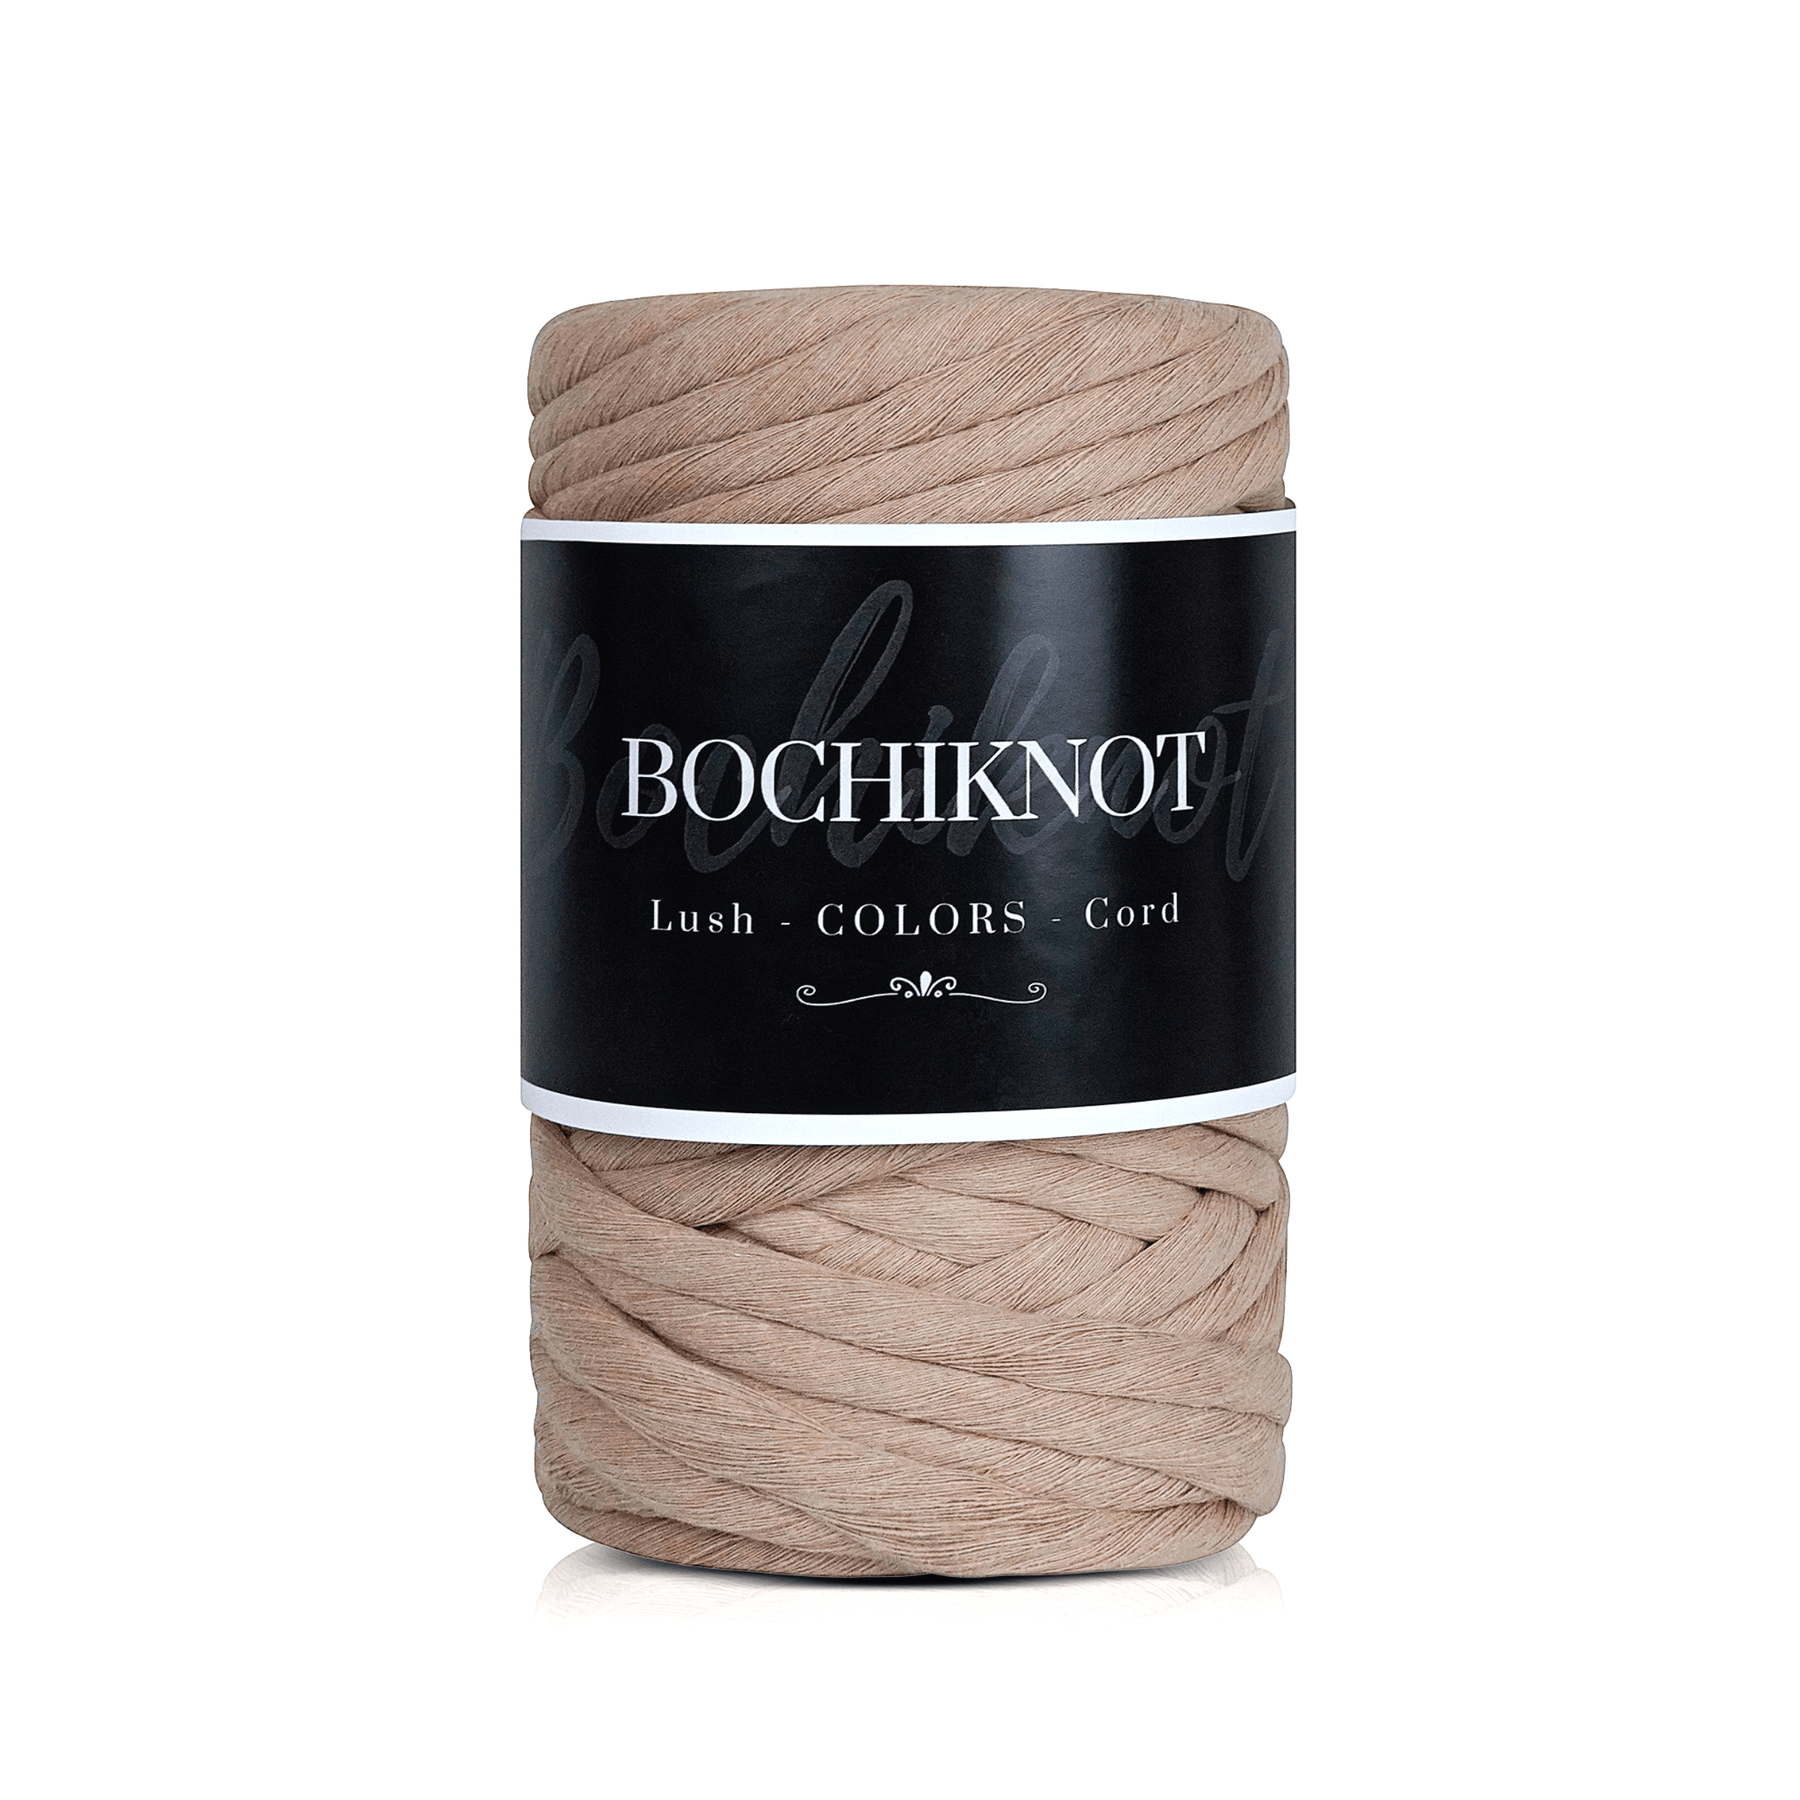 BOCHIKNOT Macrame Cord 3mm x 650Yds Bulk Roll - Natural Single Strand Macrame Cotton Cord - Macrame Supply - Large Roll of Macrame Cotton Rope for